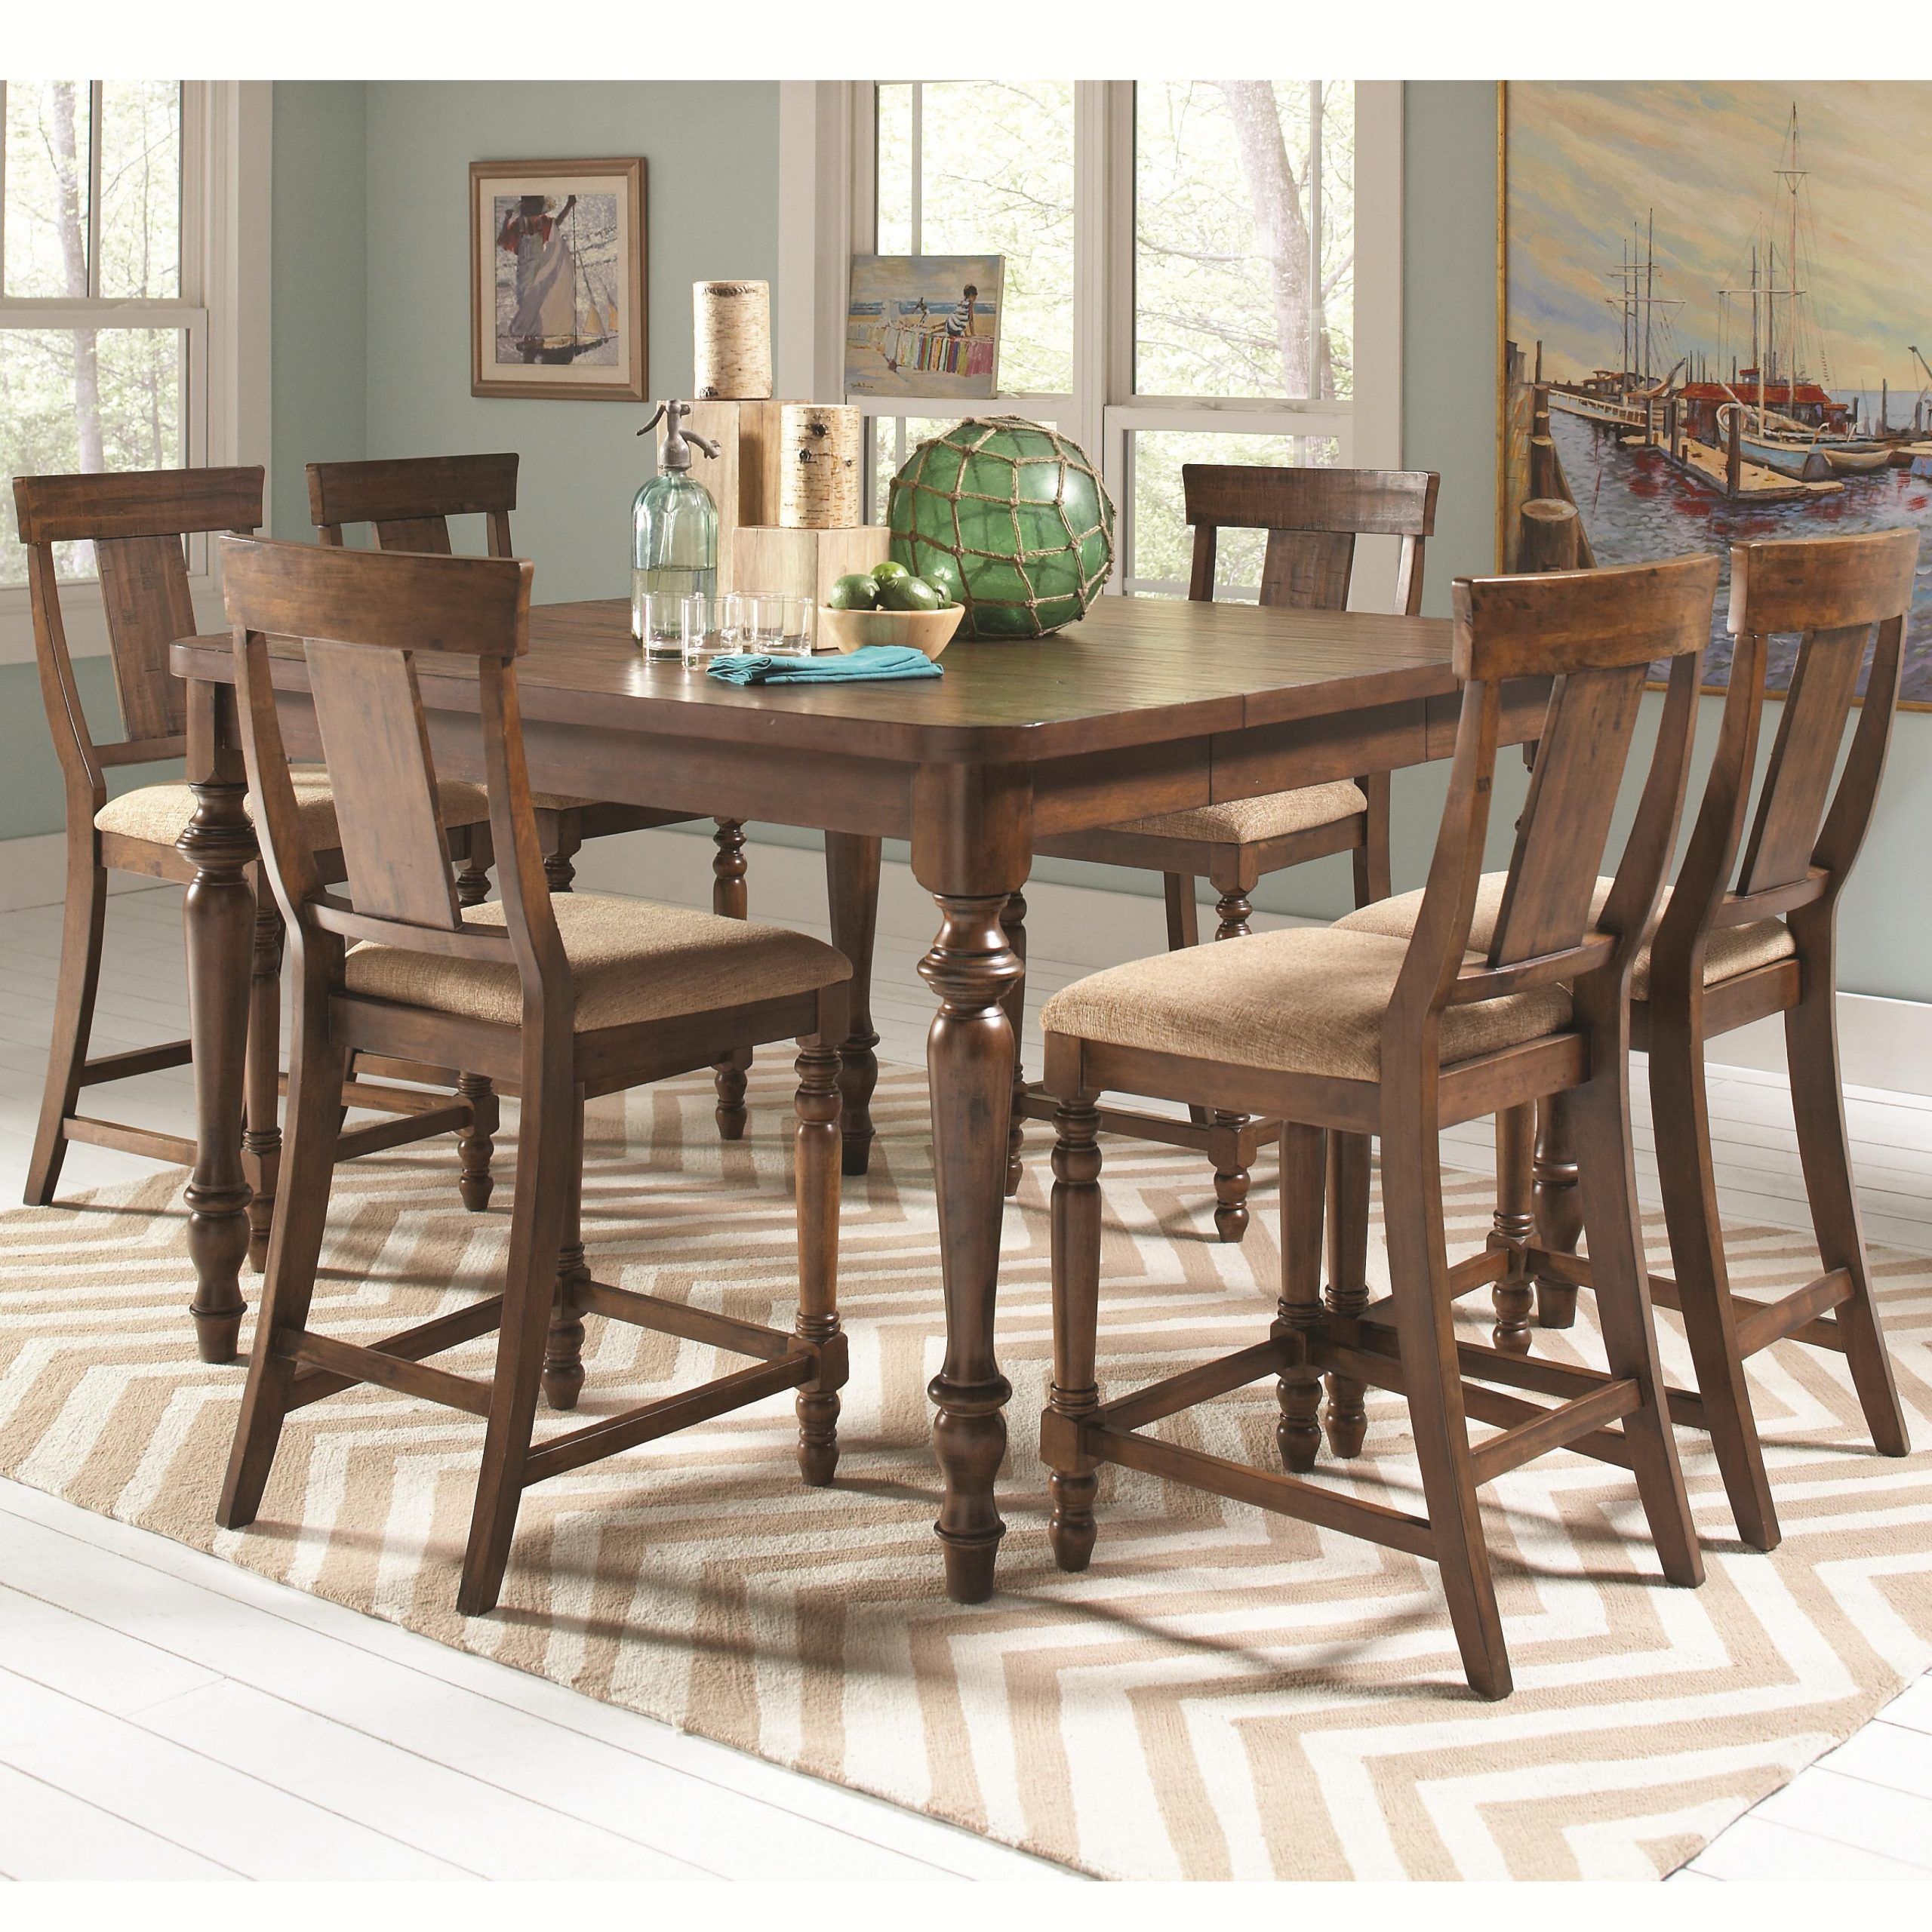 Preferred Counter Height Dining Tables Intended For Jonas Counter Height Table With 6 Chairs (View 12 of 20)